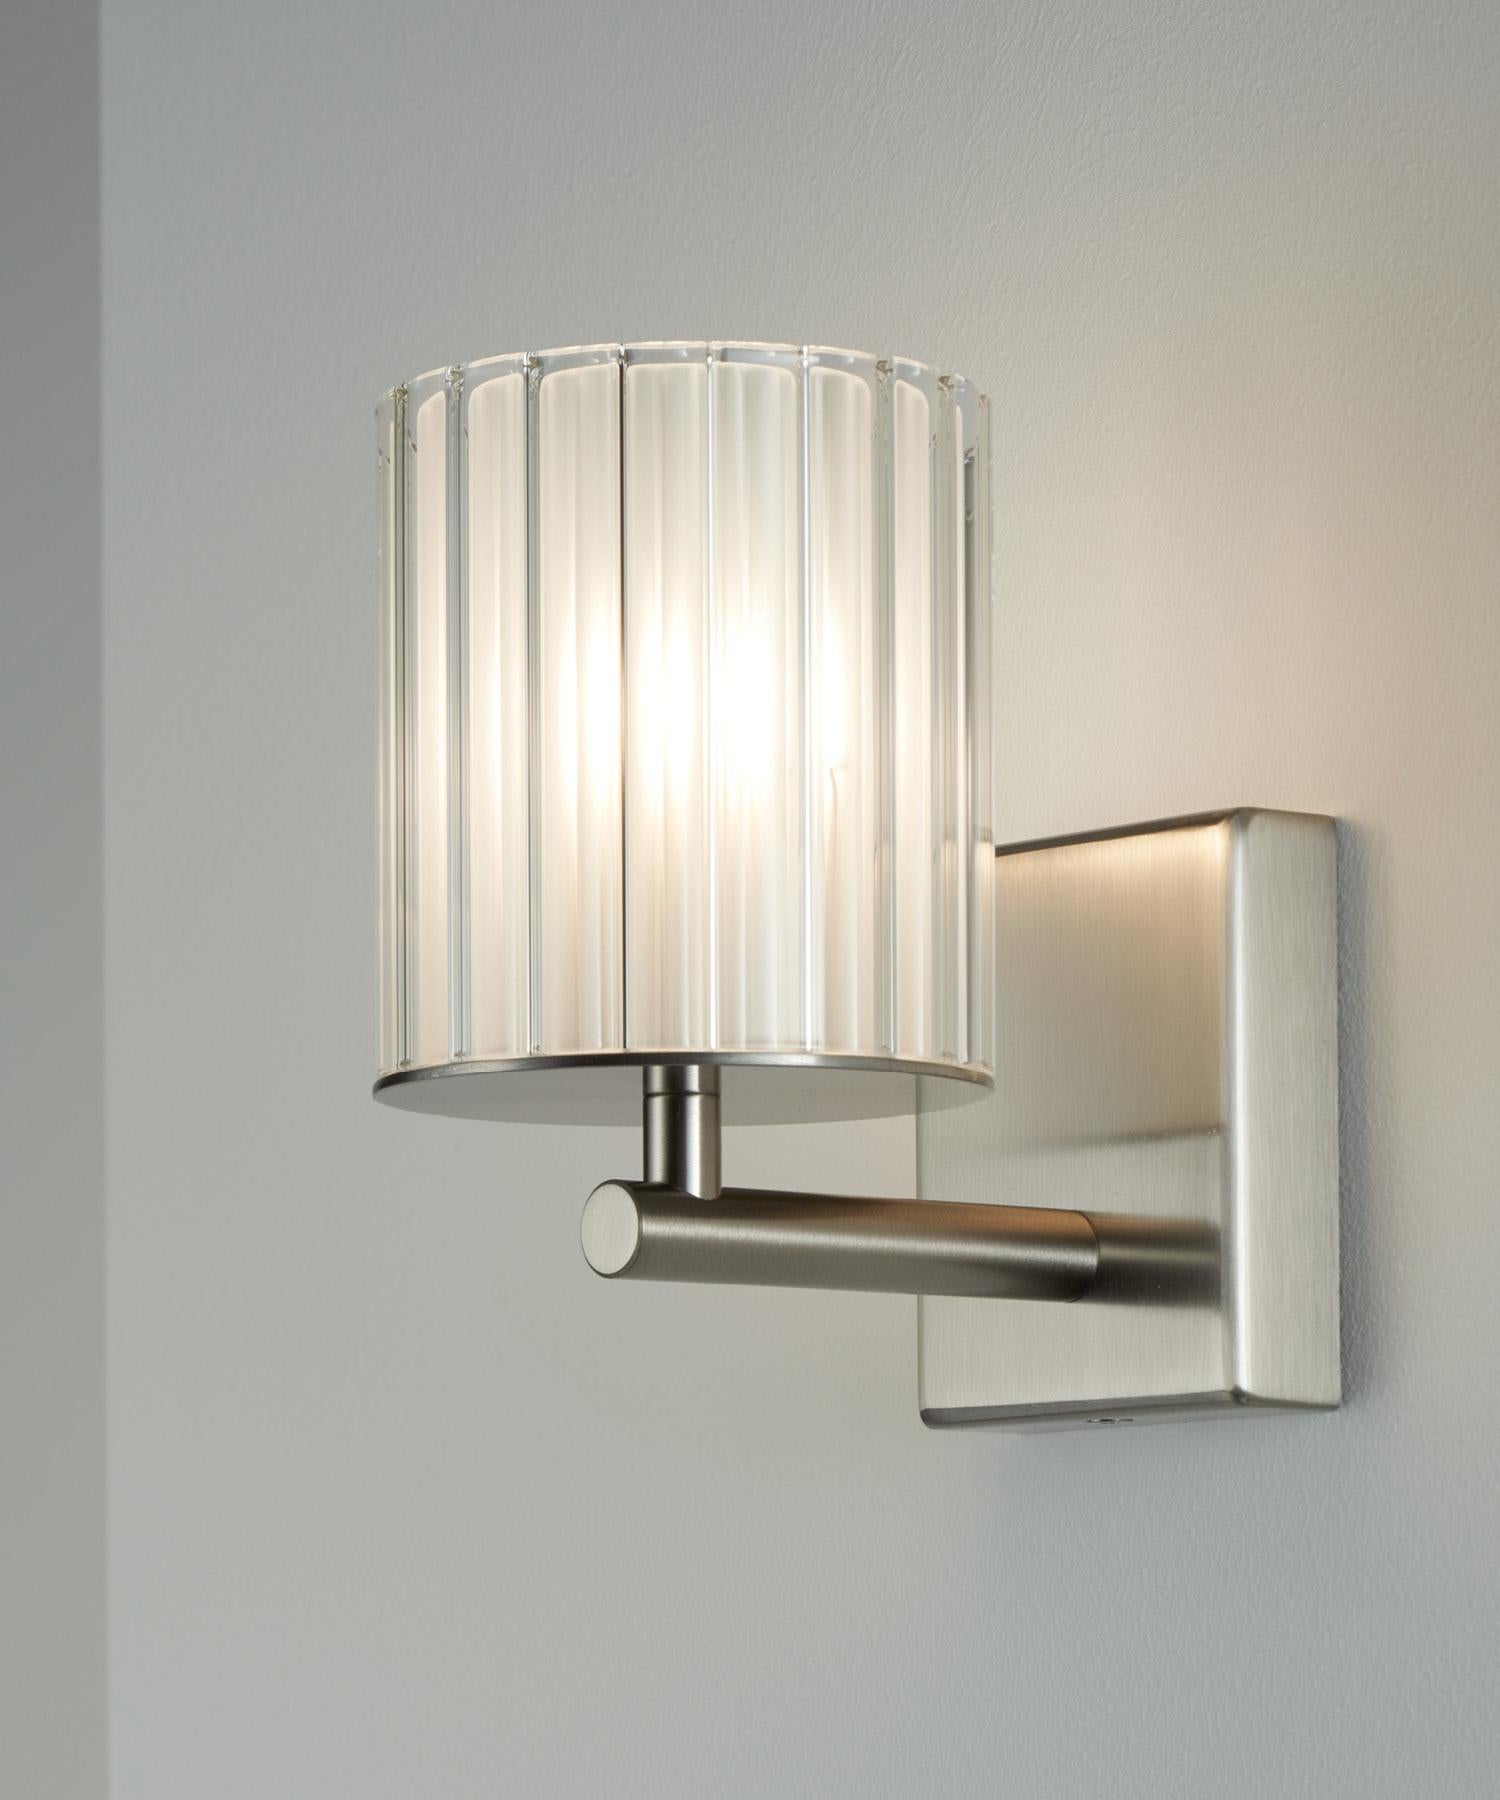 Brass Flute Wall Light in Polished Nickel with Frosted Glass Diffuser, UL Listed For Sale